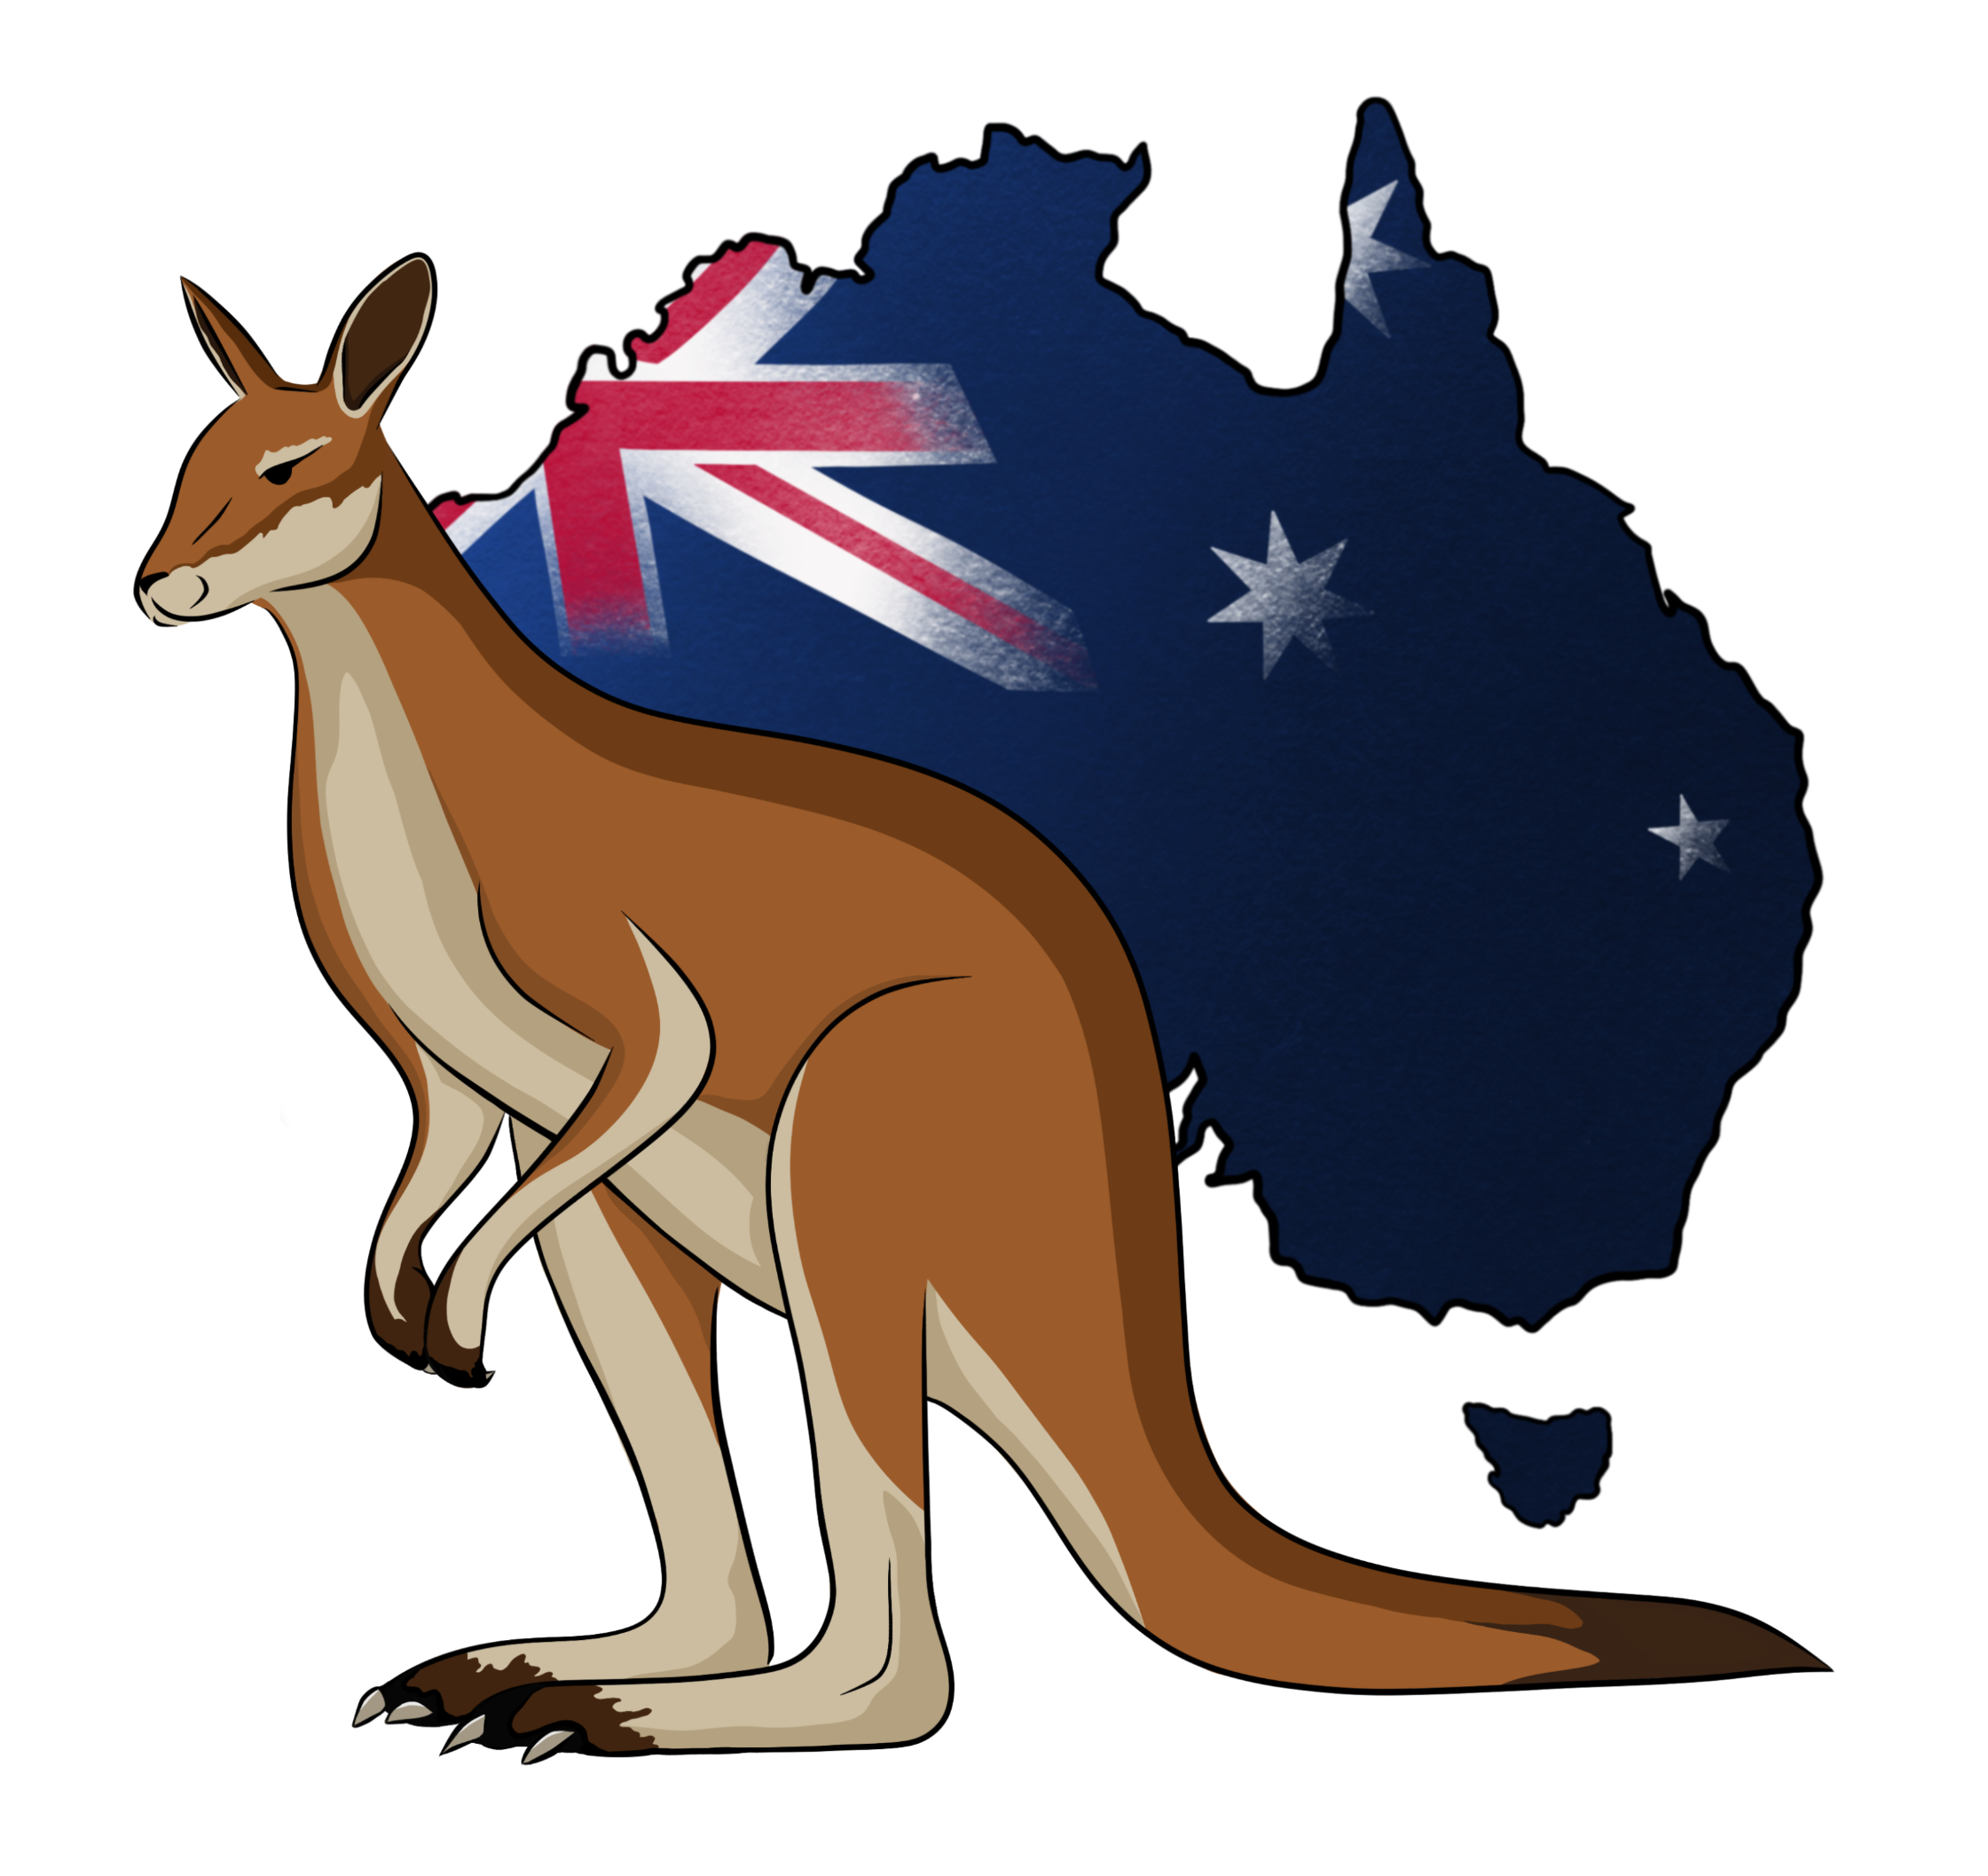 Kangaroo illustrations of Australia to draw attention to the video review